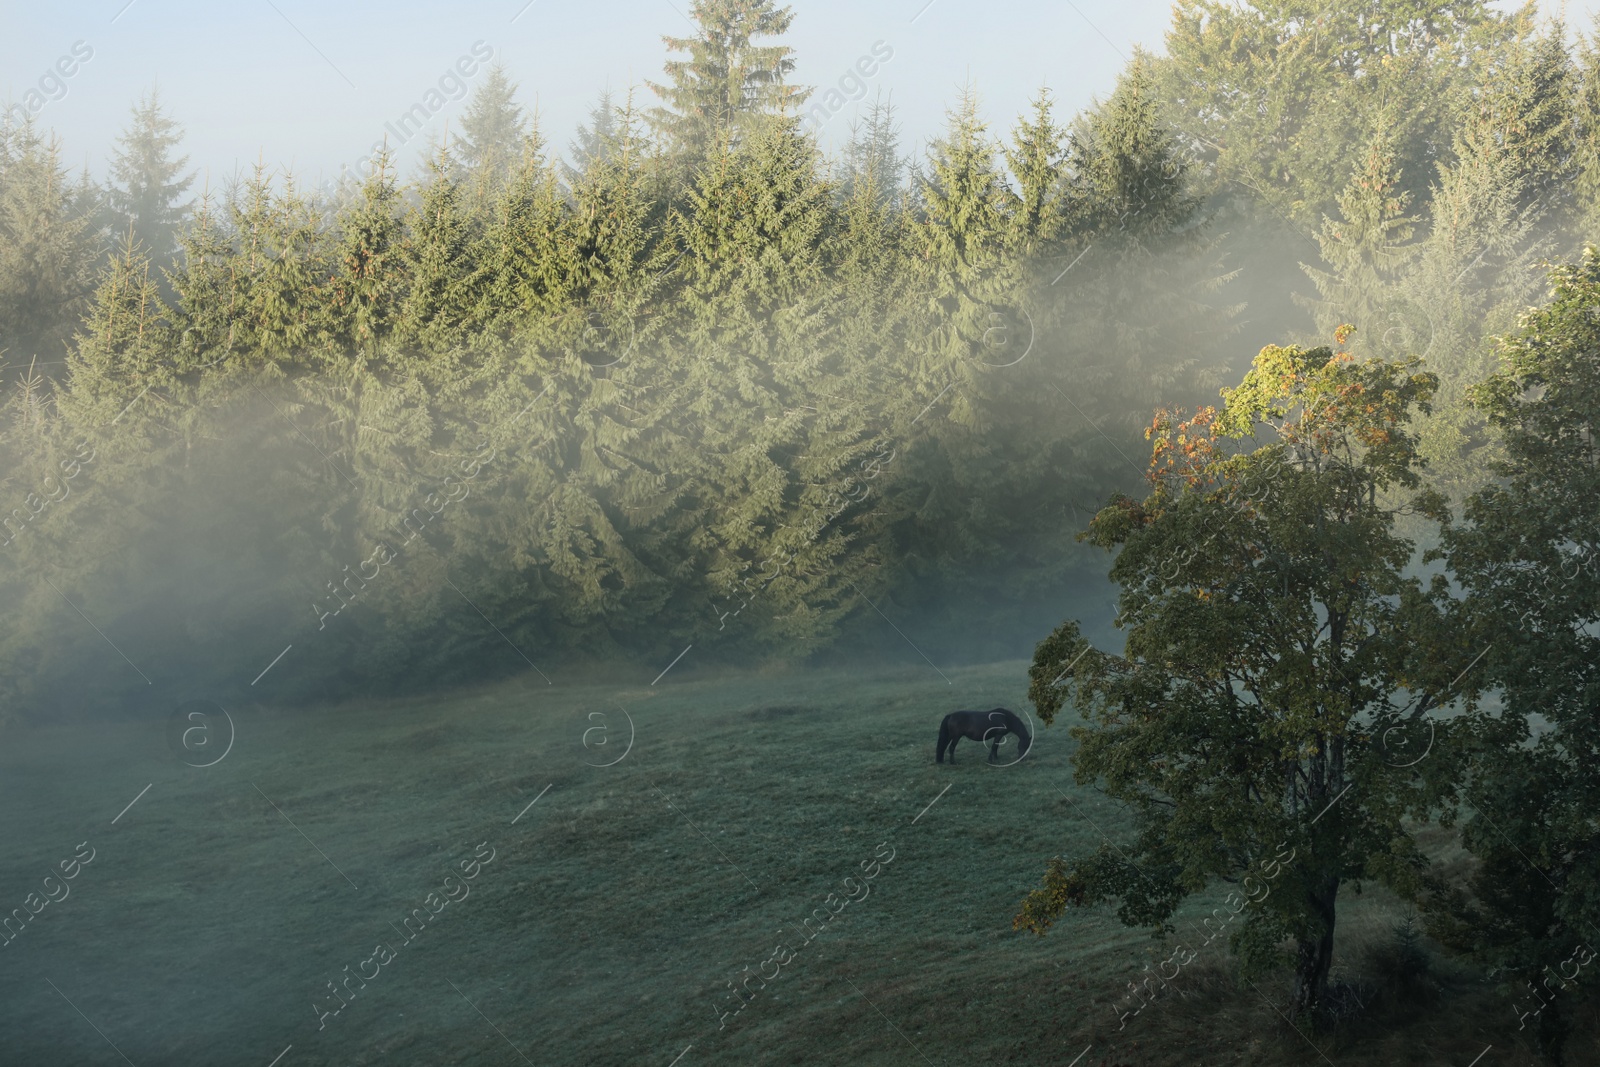 Image of Pasture with grazing horse surrounded by trees in foggy morning